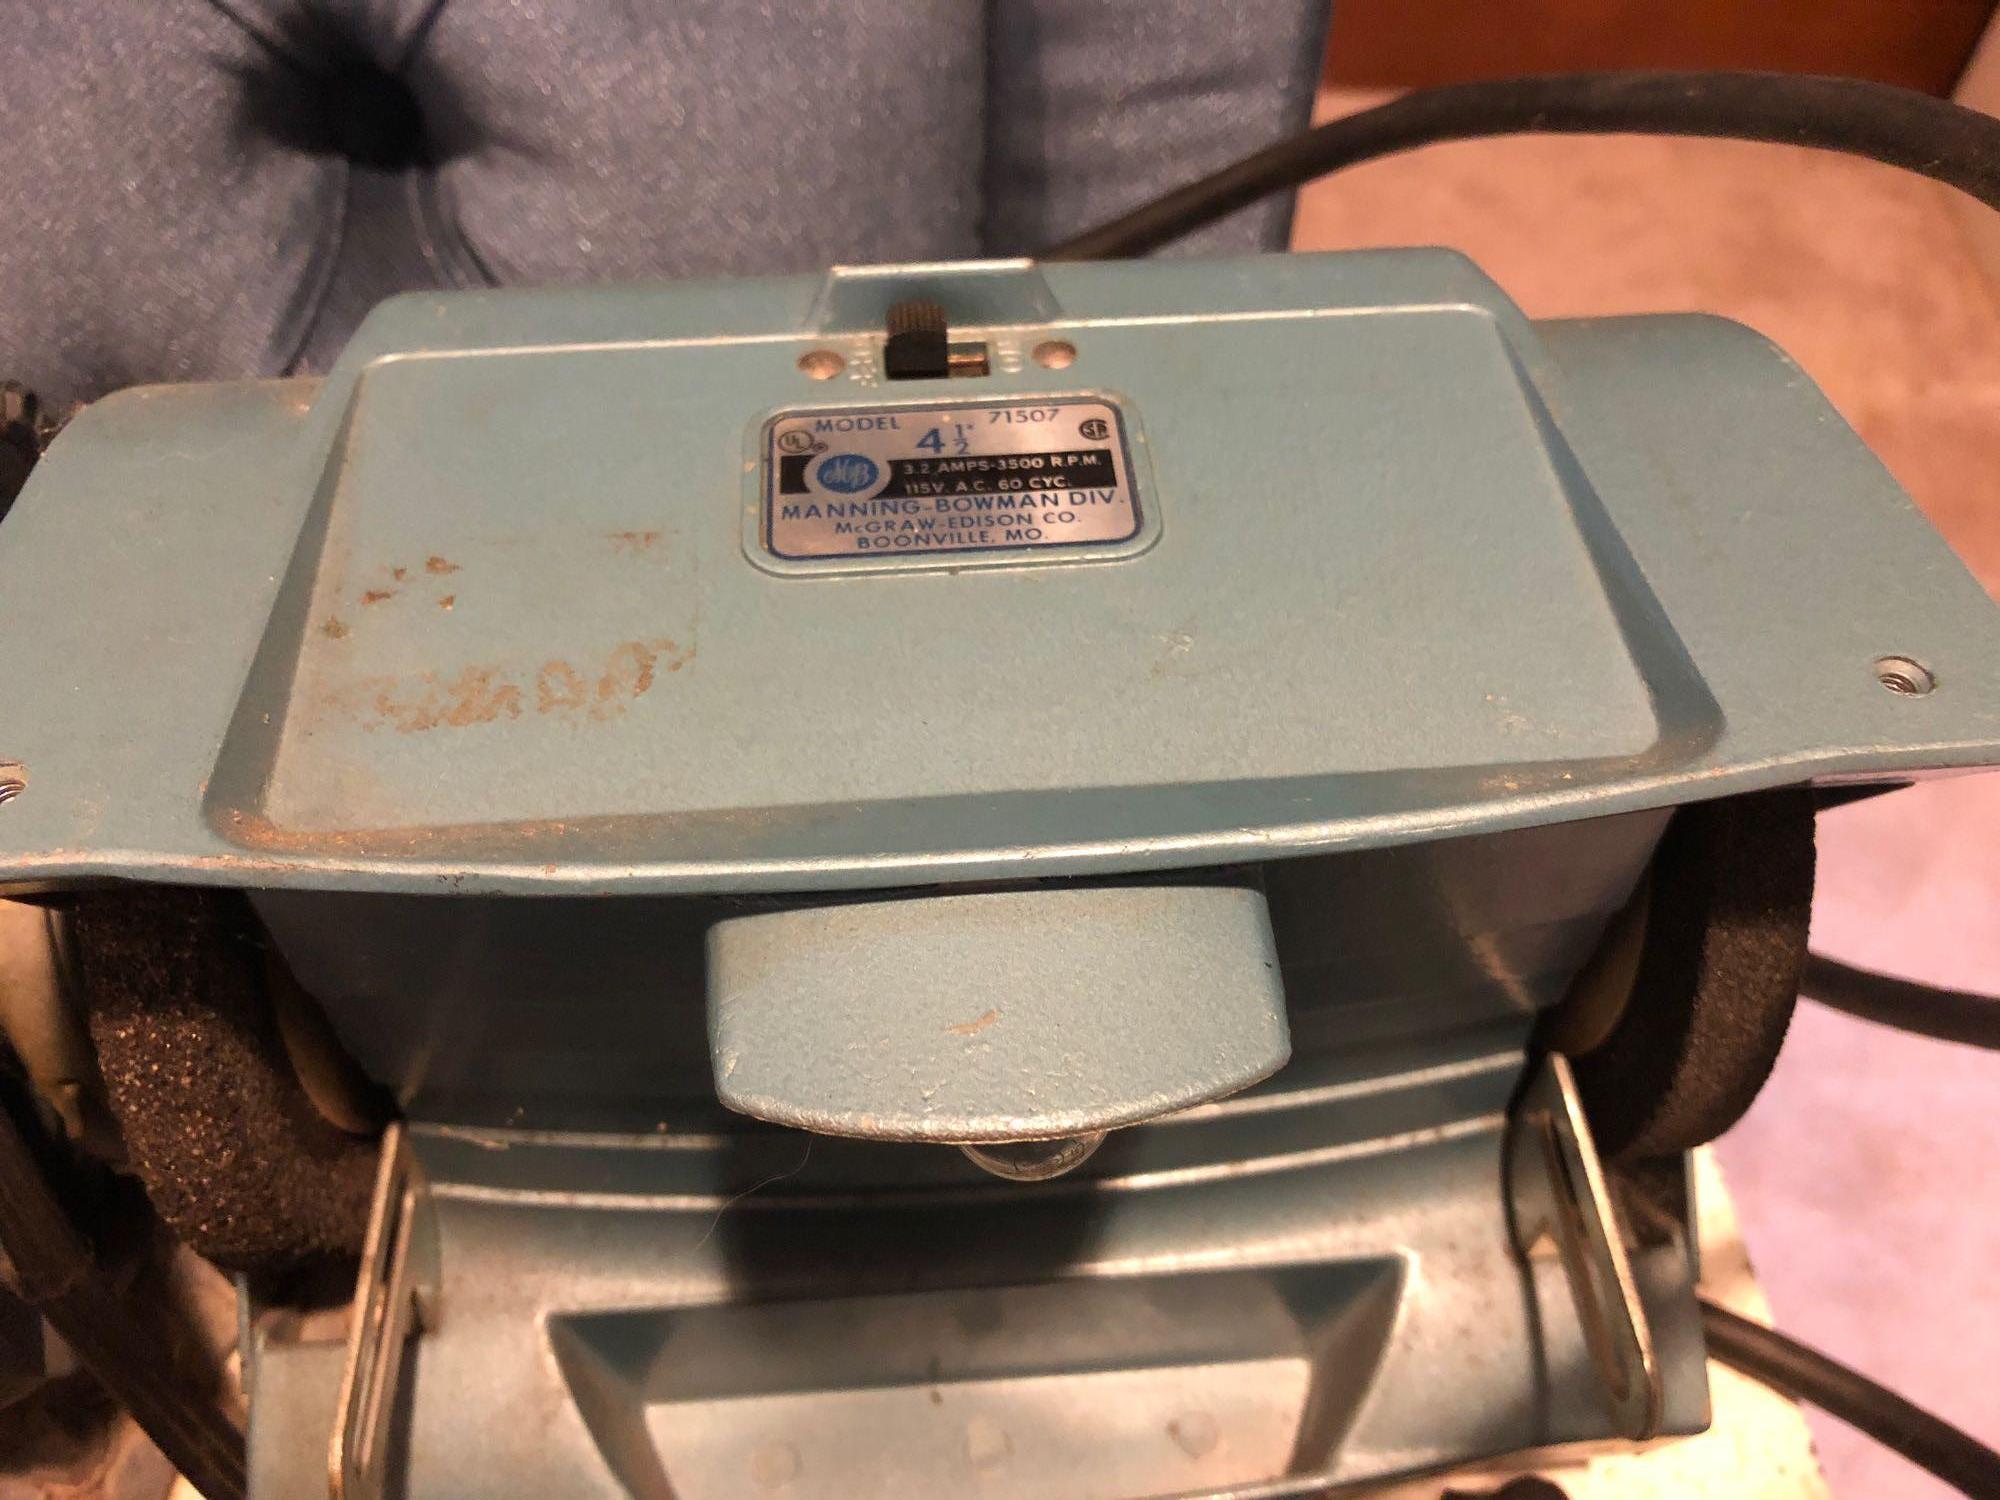 Vintage BEACON STAR (model 6" holiday combo) jewelry machine, MANNING BOWMAN (model 71507)